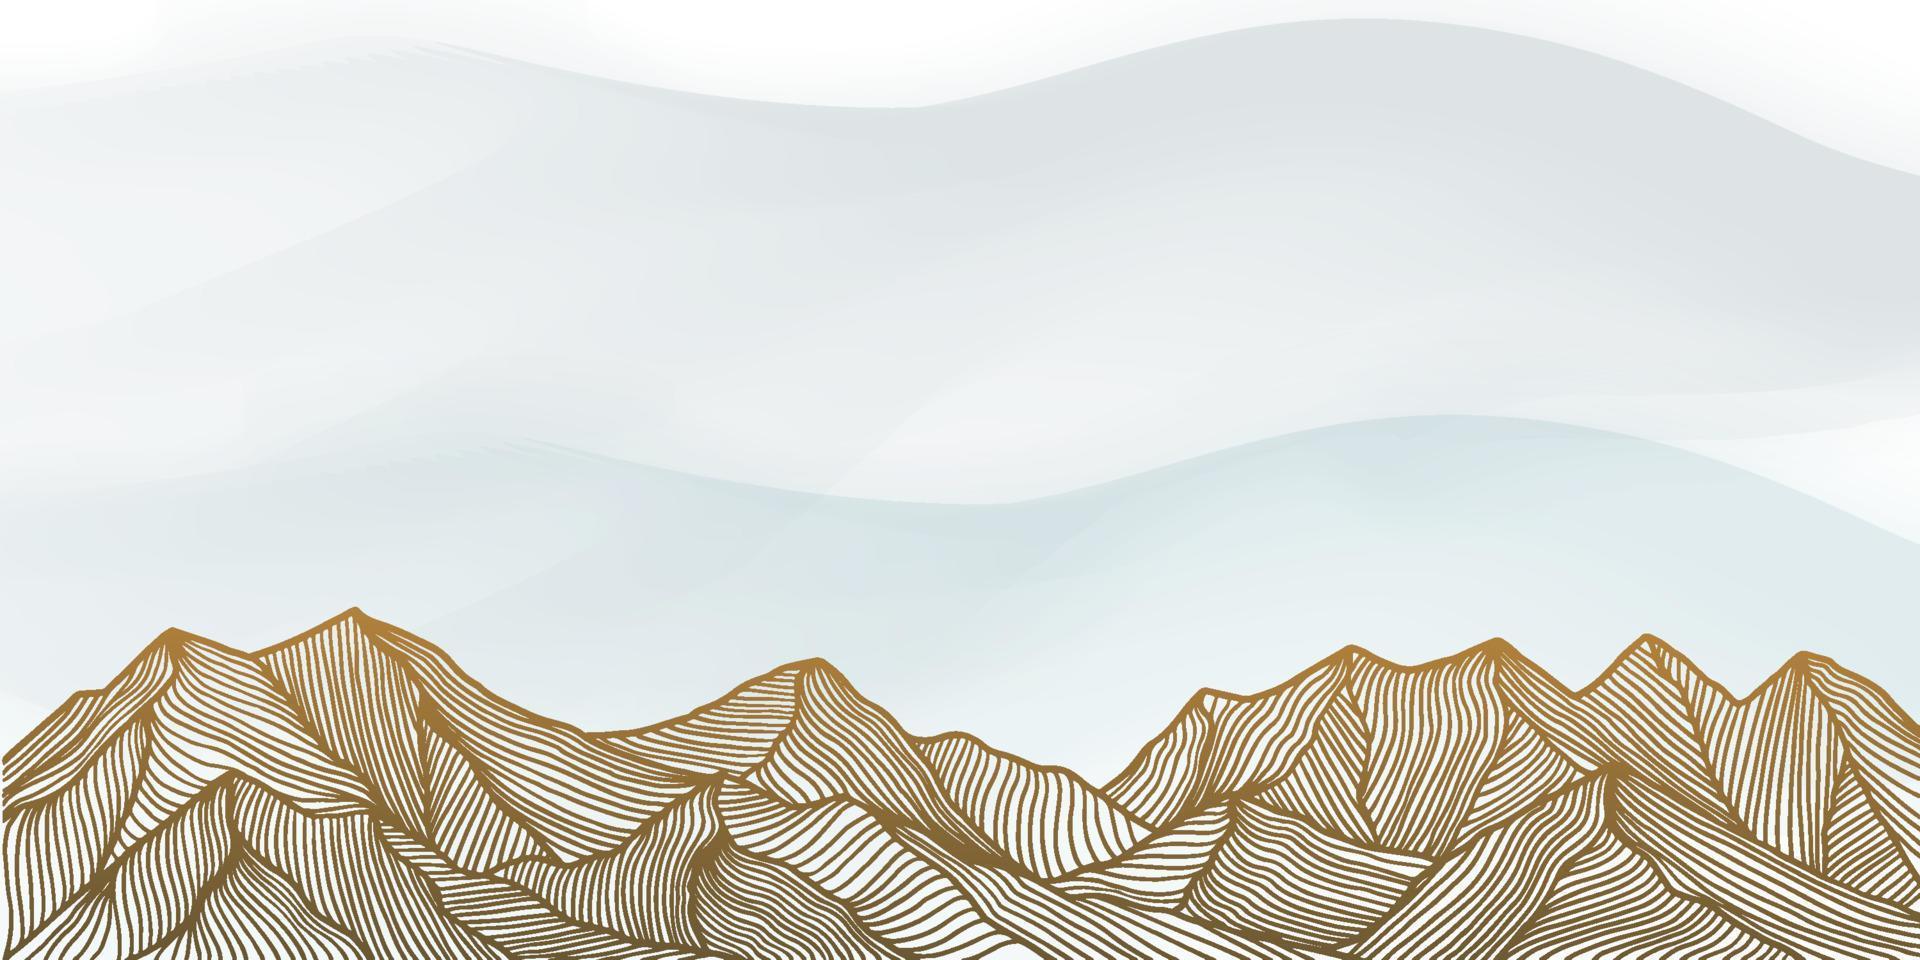 gradient abstract golden mountains landscape background design in line arts styles vector